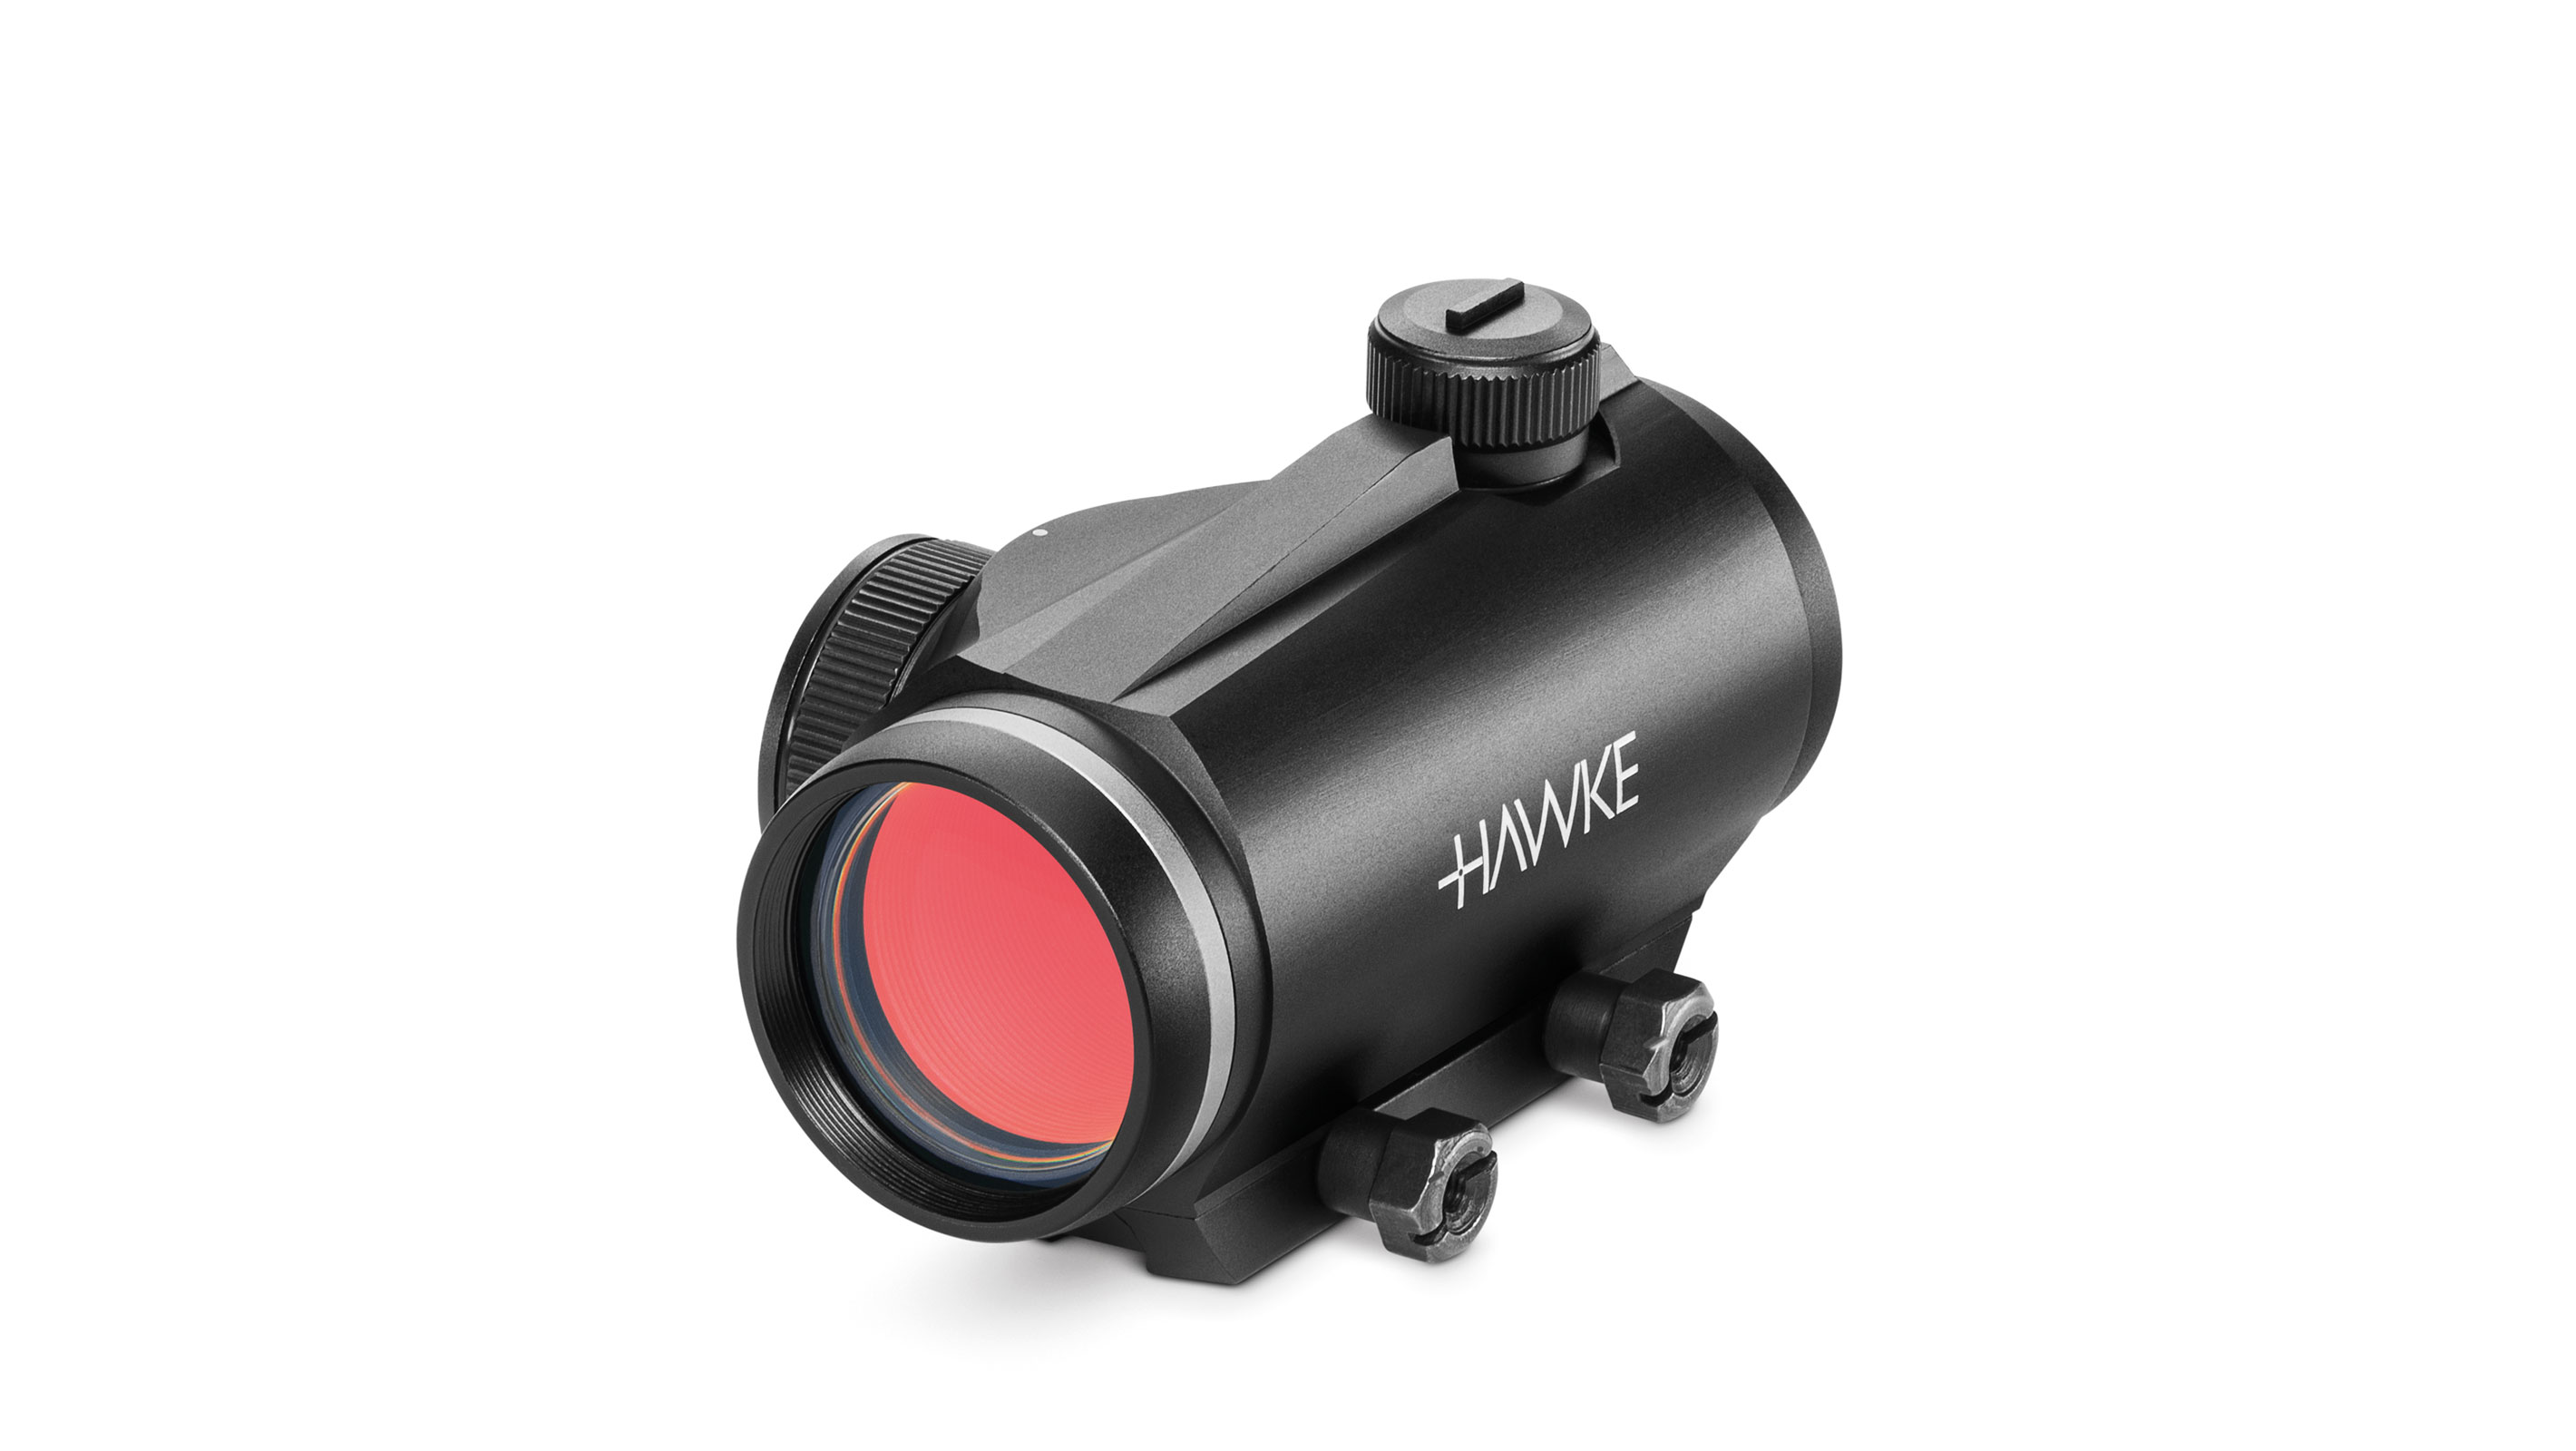 Objective End View of The Hawke Tactical Sight